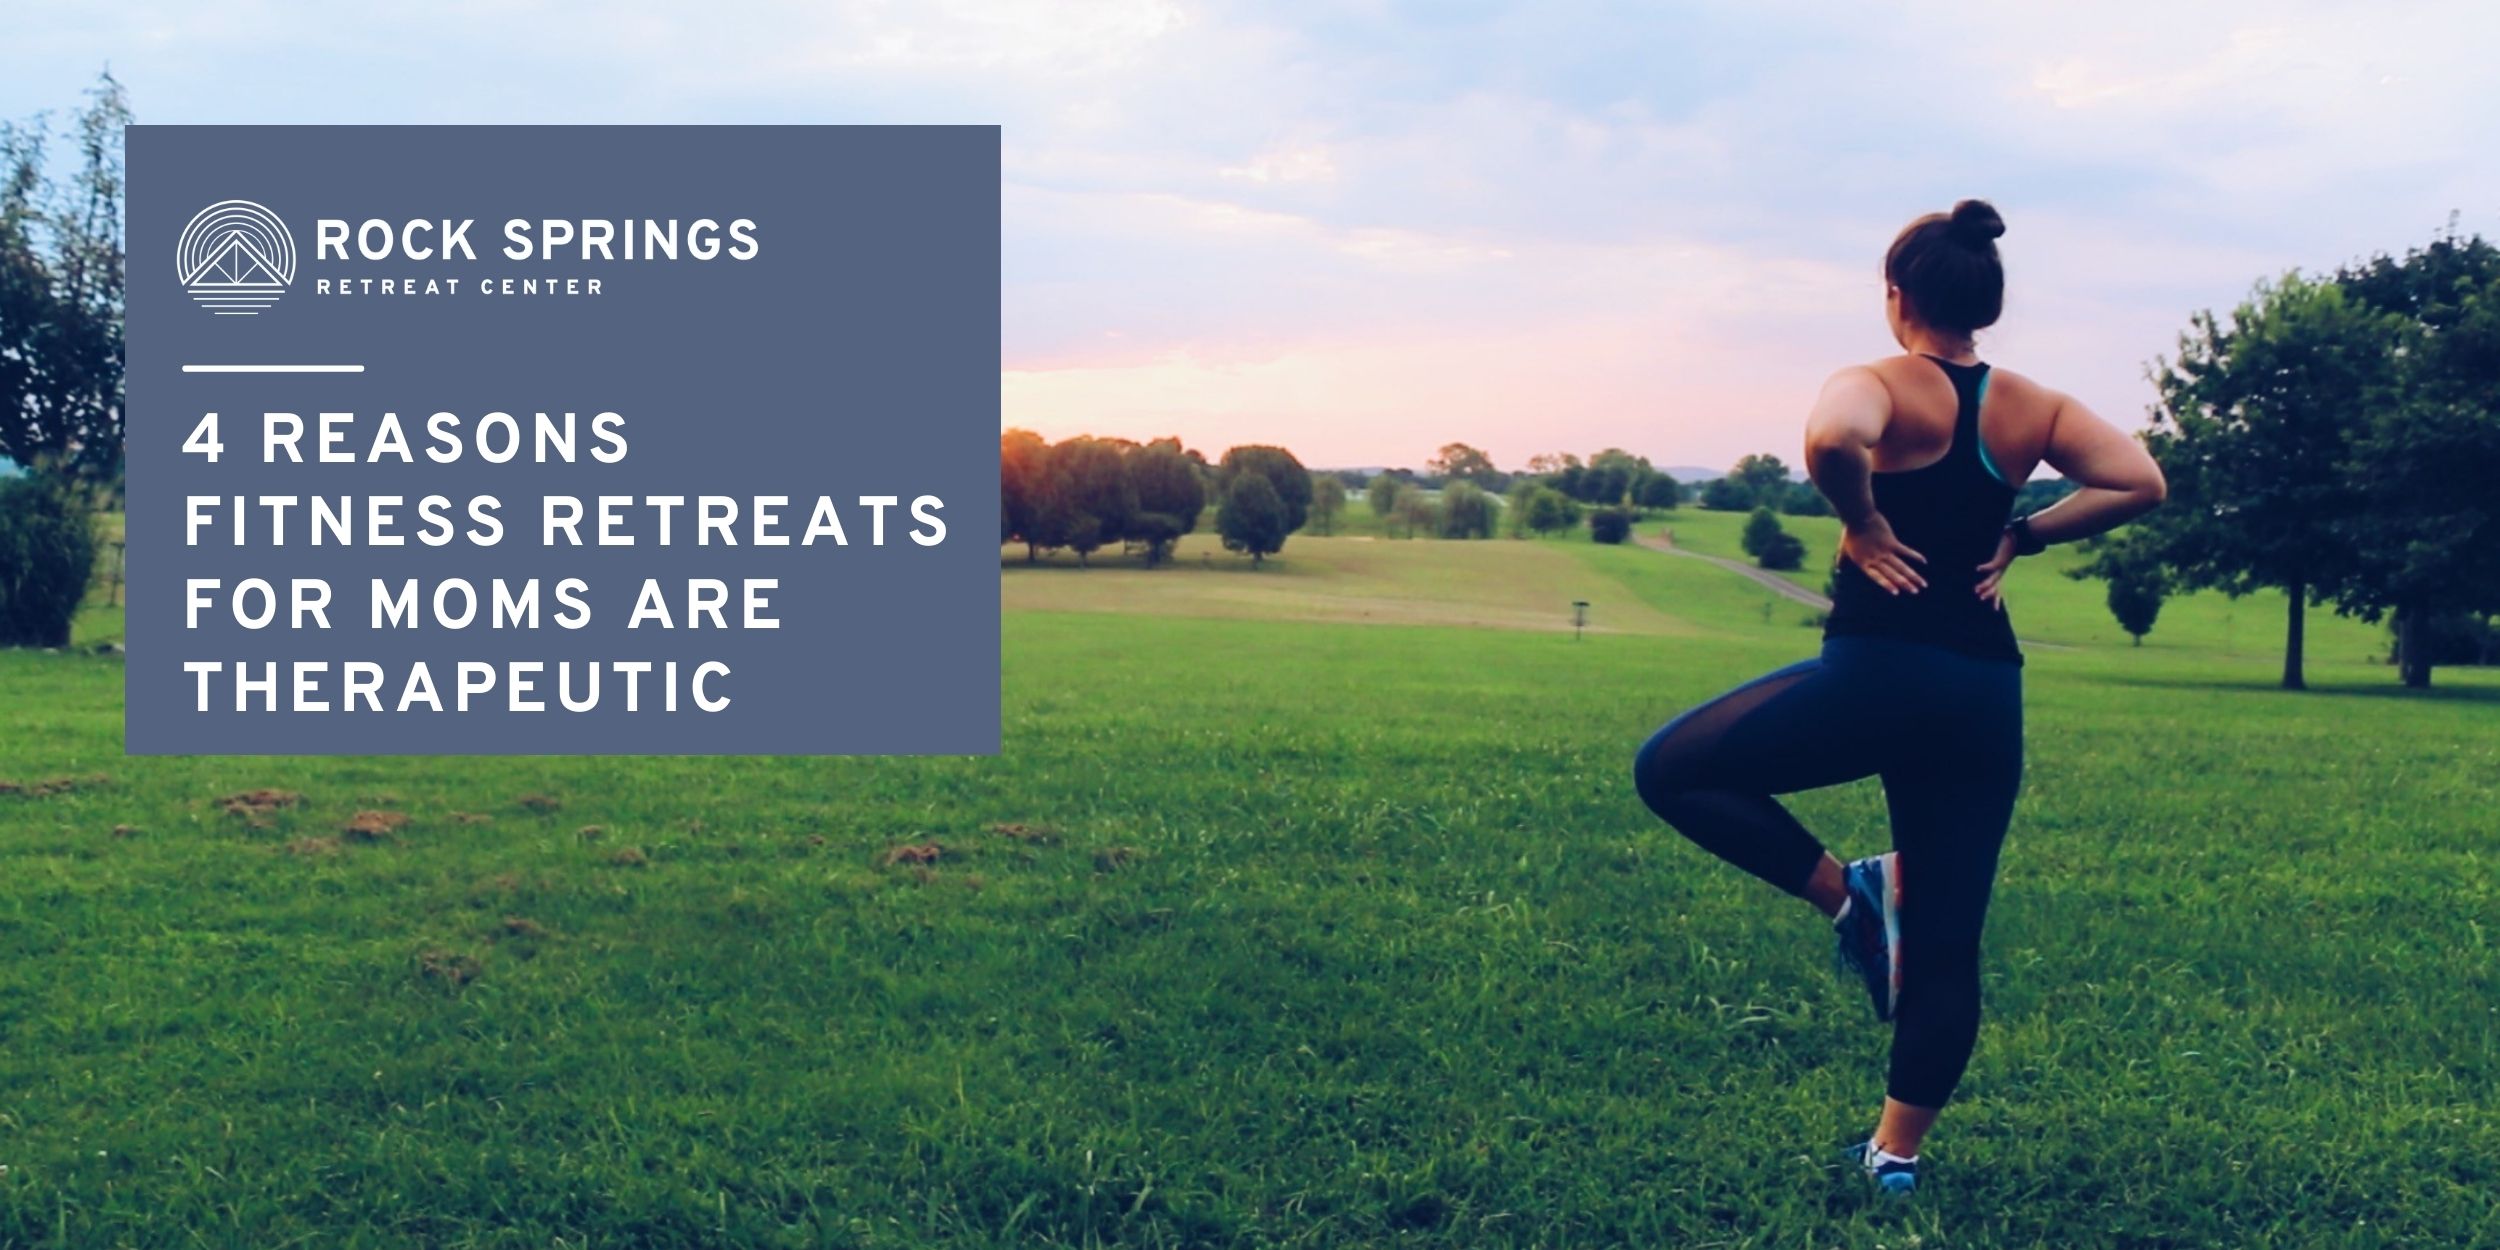 4 Reasons Fitness Retreats for Moms are Therapeutic